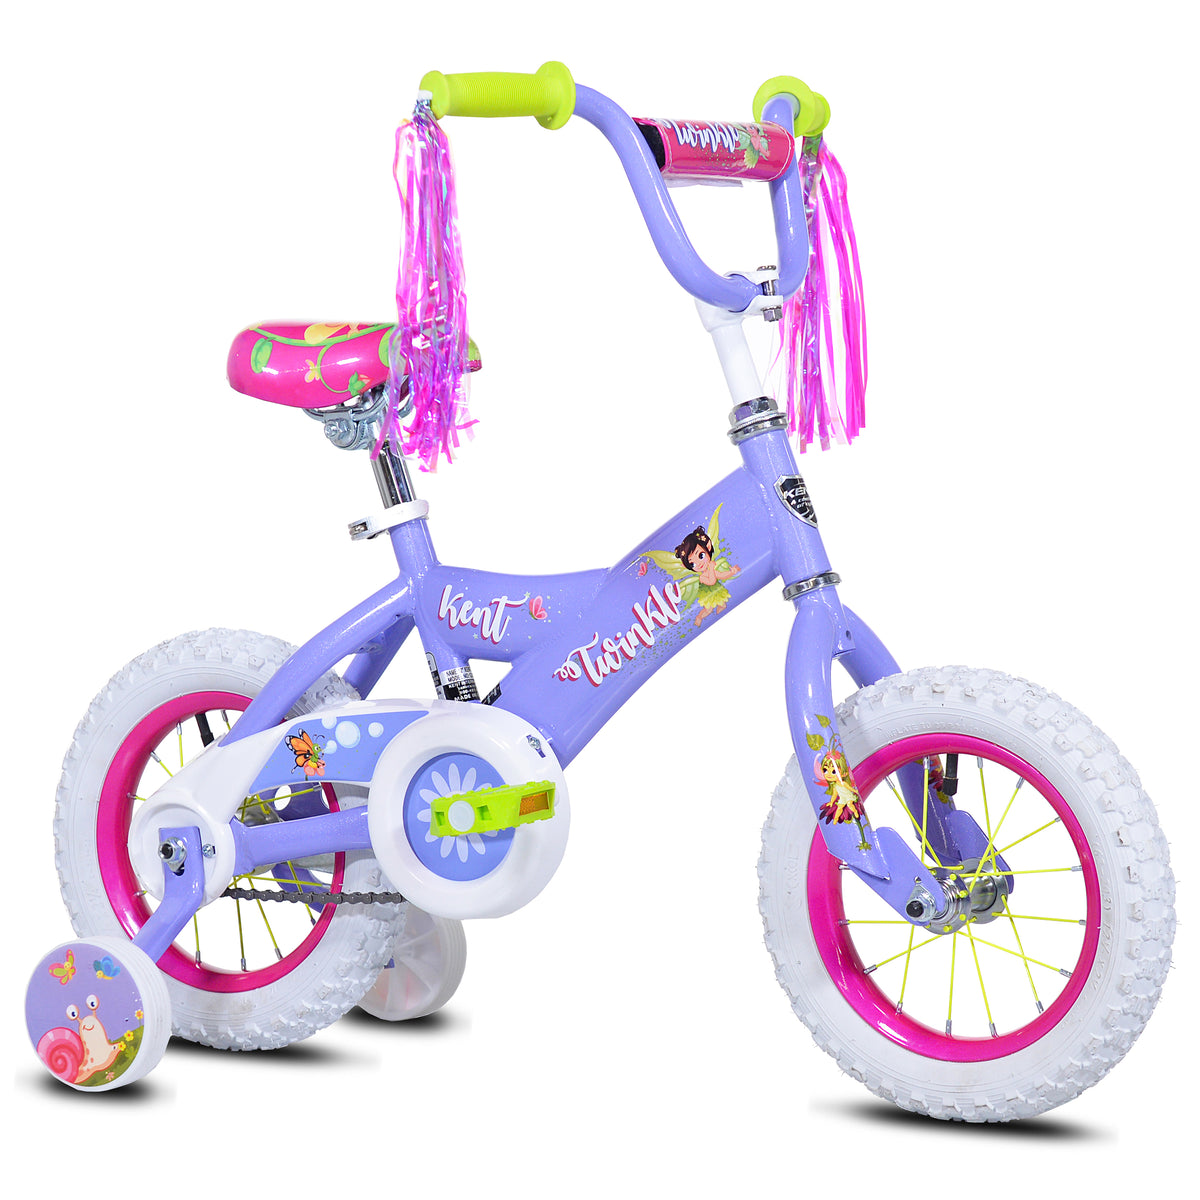 12" Kent Twinkle | Cruiser Bike for Kids Ages 2-4